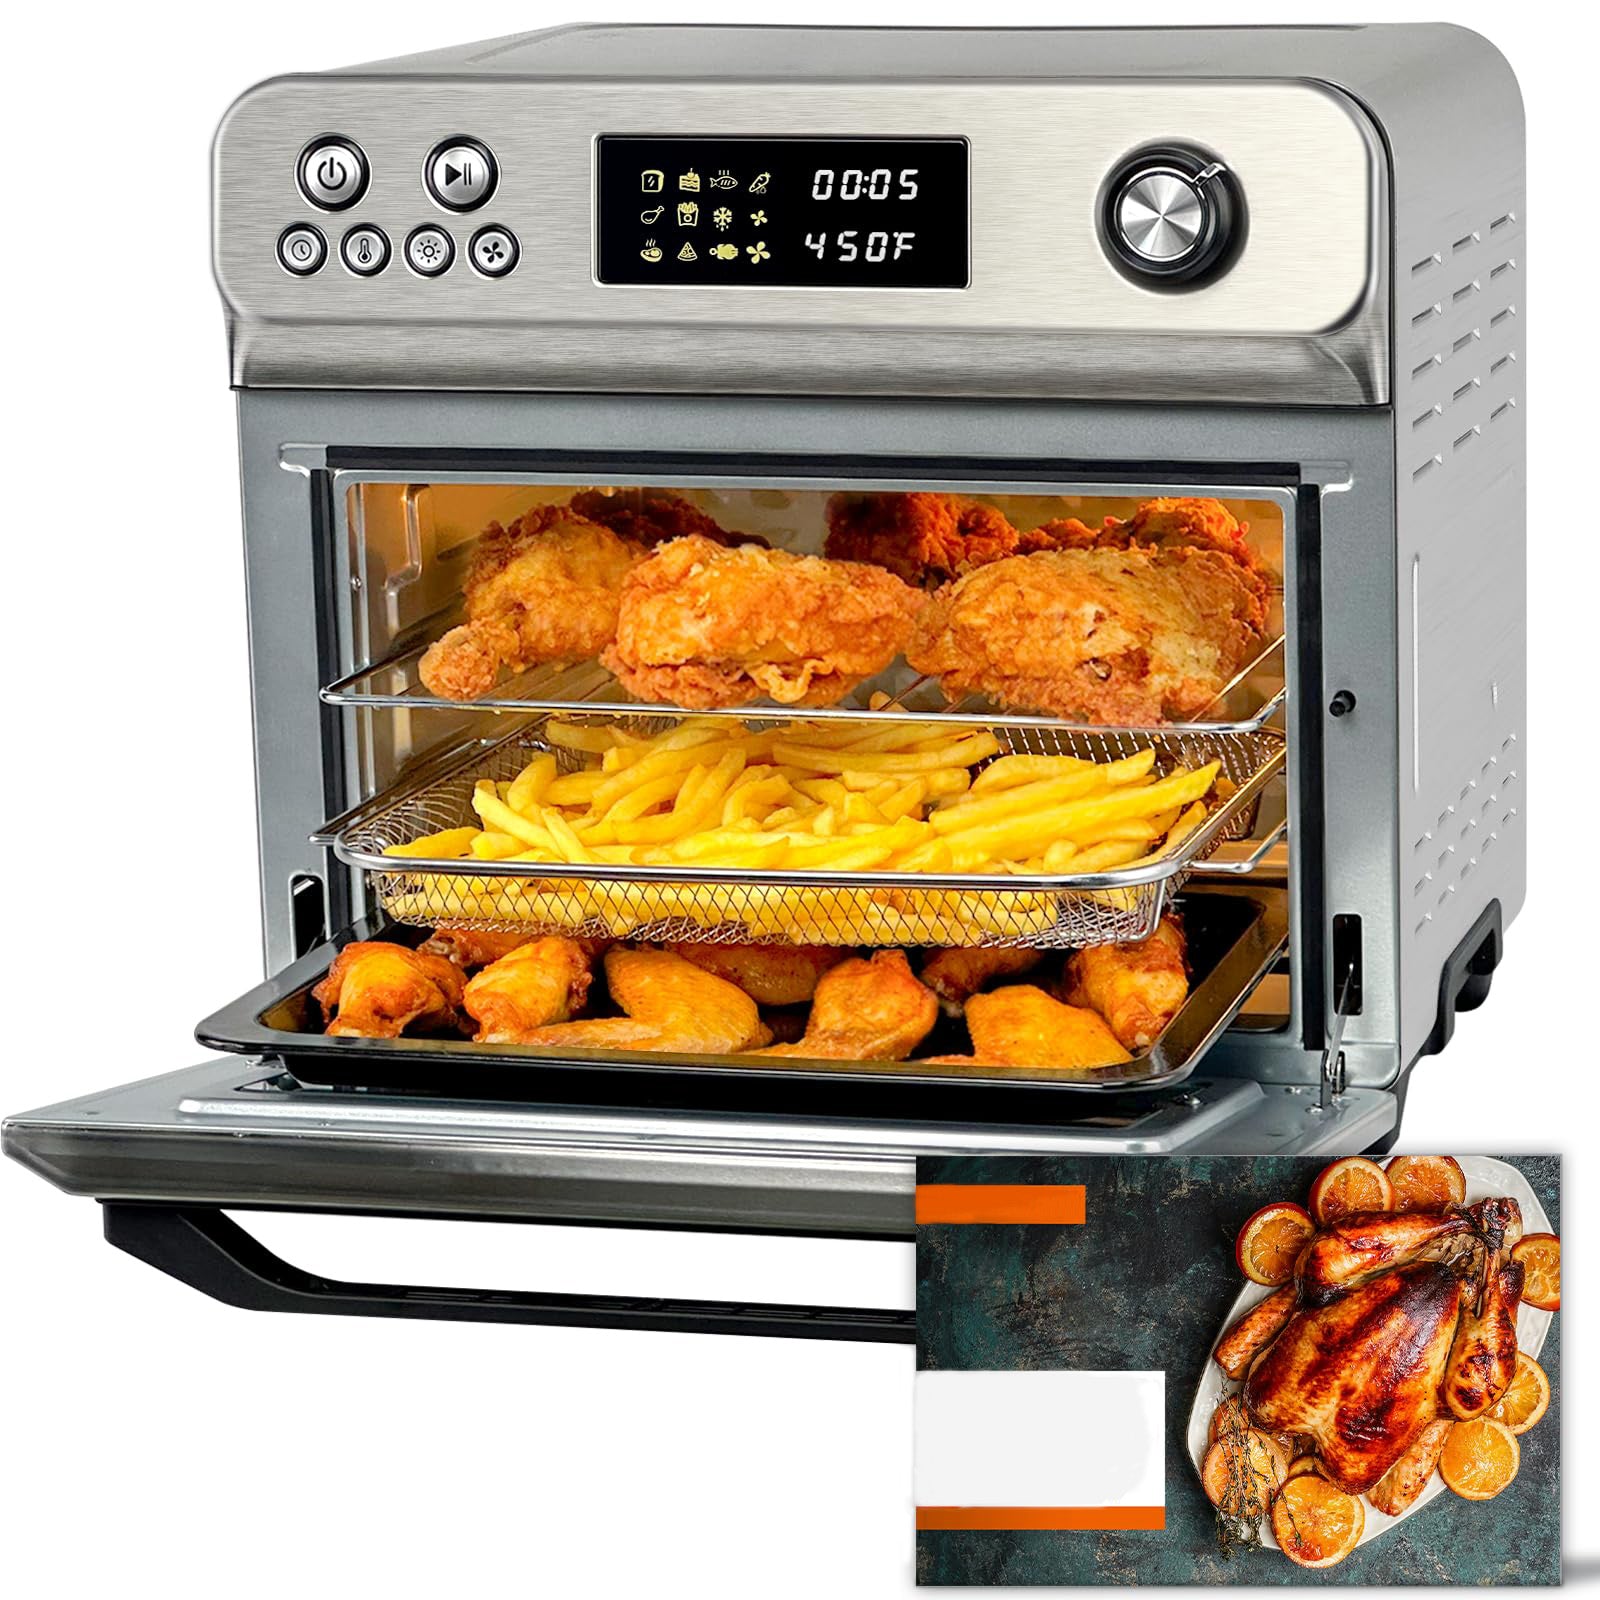 10-in-1 Large Toaster Oven Combo with LED Display Knob Control